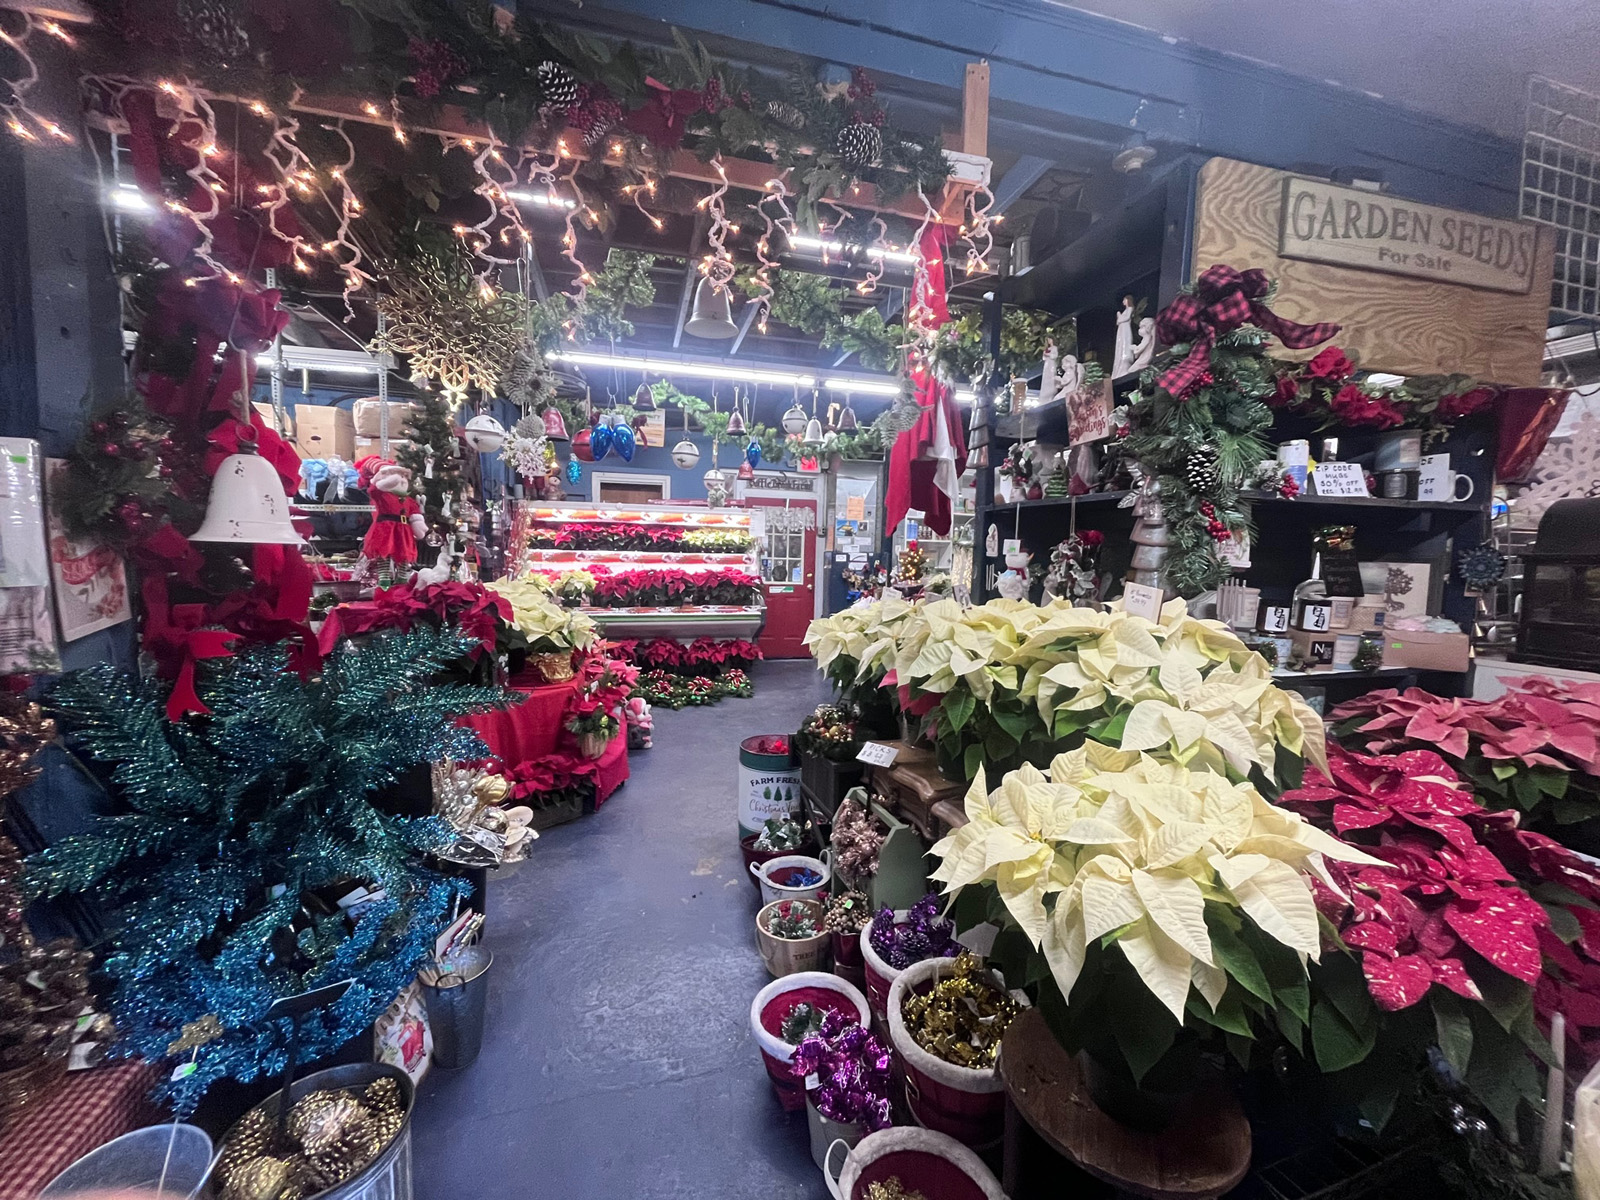 You will find the largest selection of all types of wreaths, greens, roping, garland and boughs in the area right here at Goffle Brook Farms in Ridgewood.